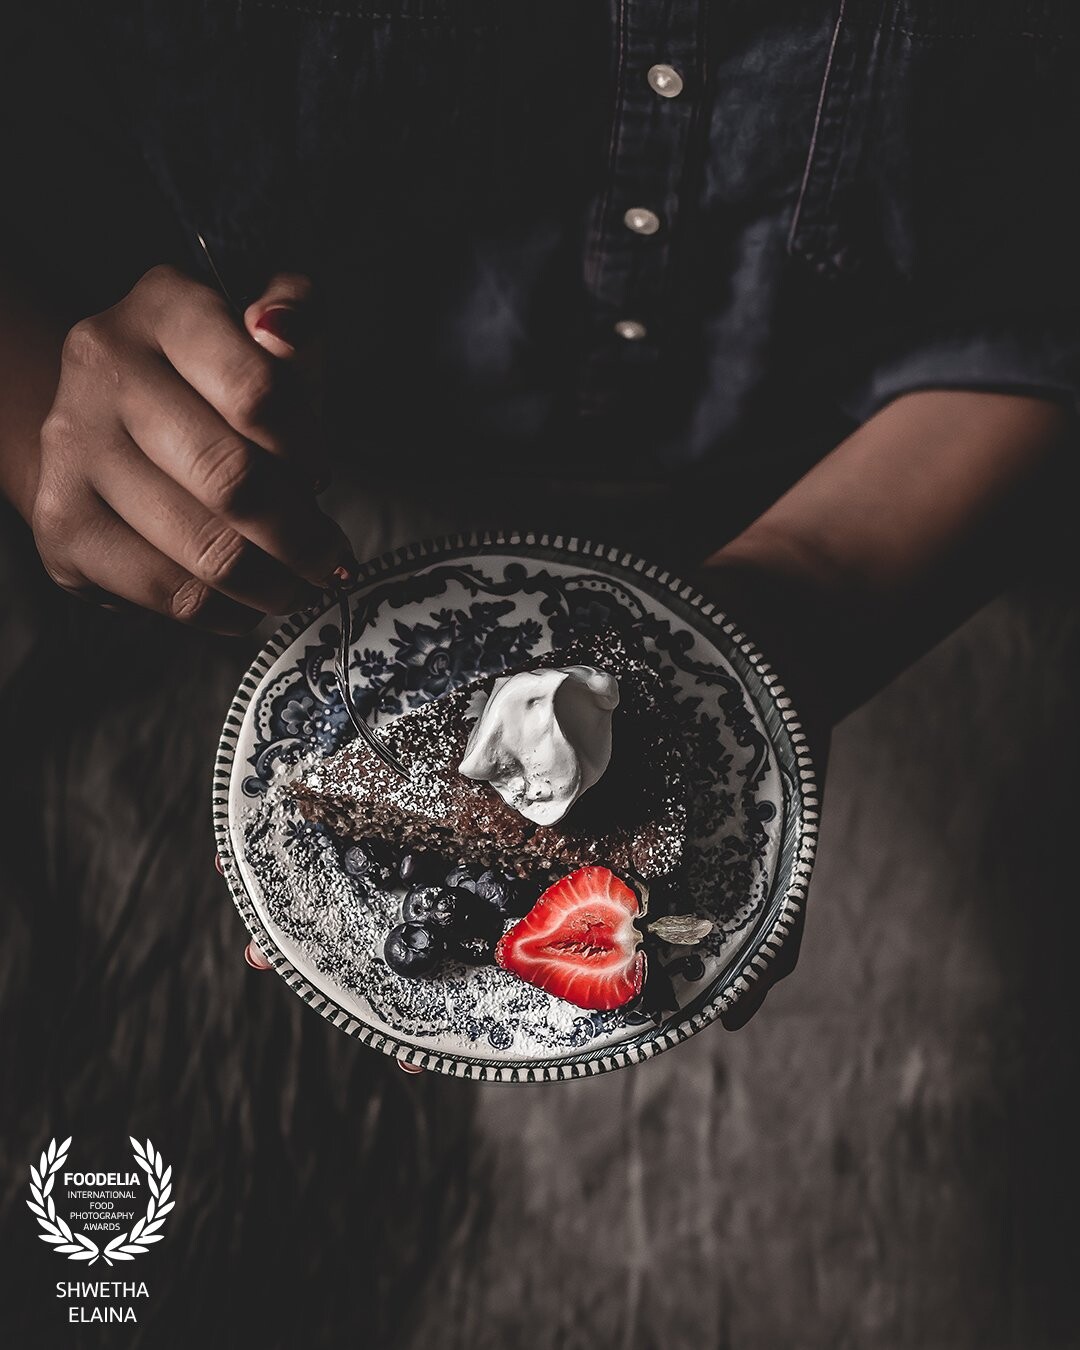 A slice of chocolate sponge dusted with powdered sugar, topped with fresh cream and strawberry. An attempt to capture an inspiration for a monthly food photography challenge.  An exploration of a ‘different from the norm for me’ approach to food photography.